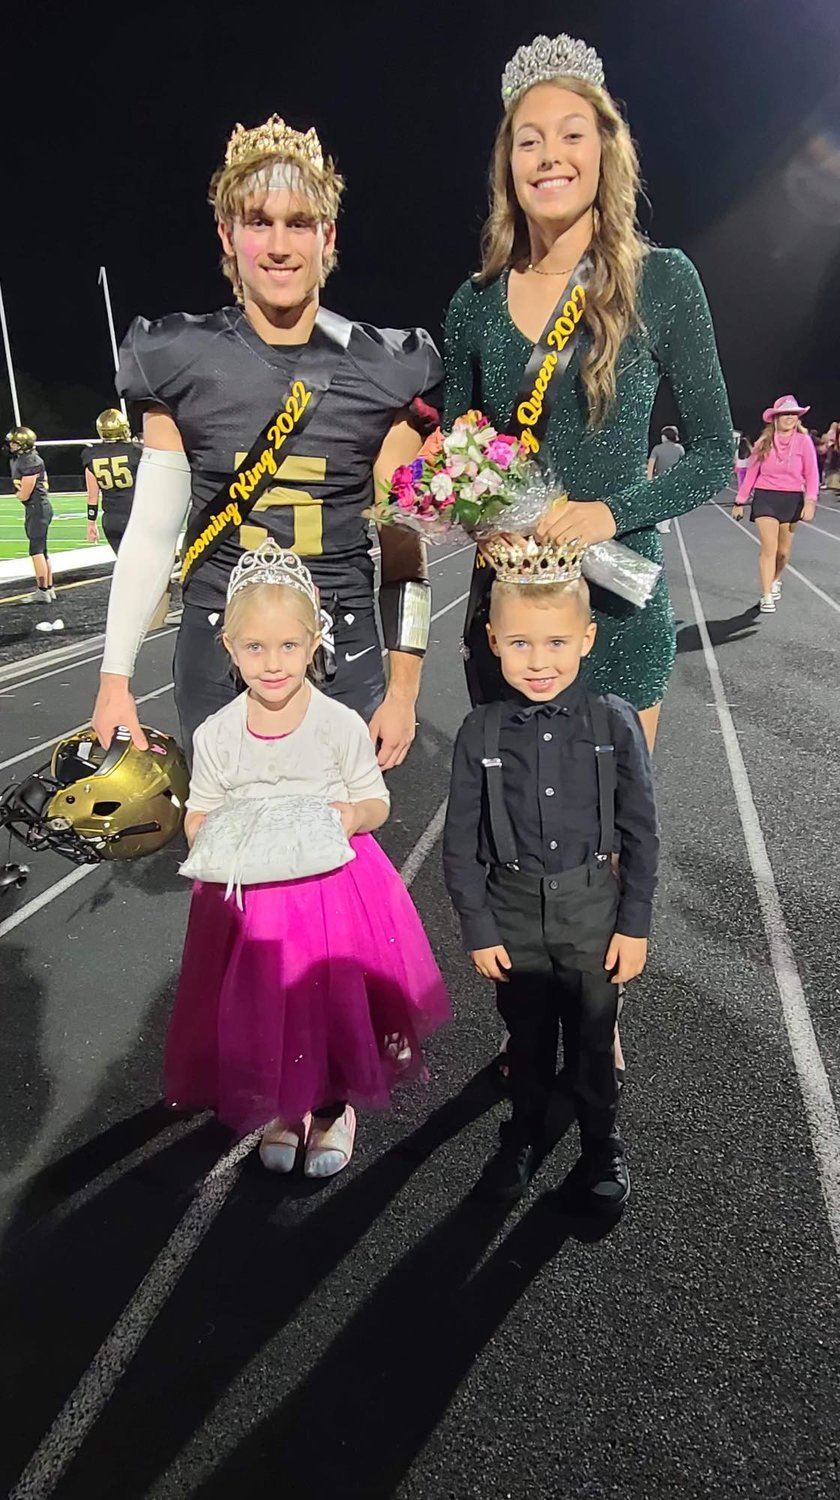 Raegan McCowan and Jacoby Fultz were named 2022 Homecoming King and Queen at halftime of Friday’s game against Glendale. Honorary escorts were Devyn Hutton (left) and Logan Knight (right).